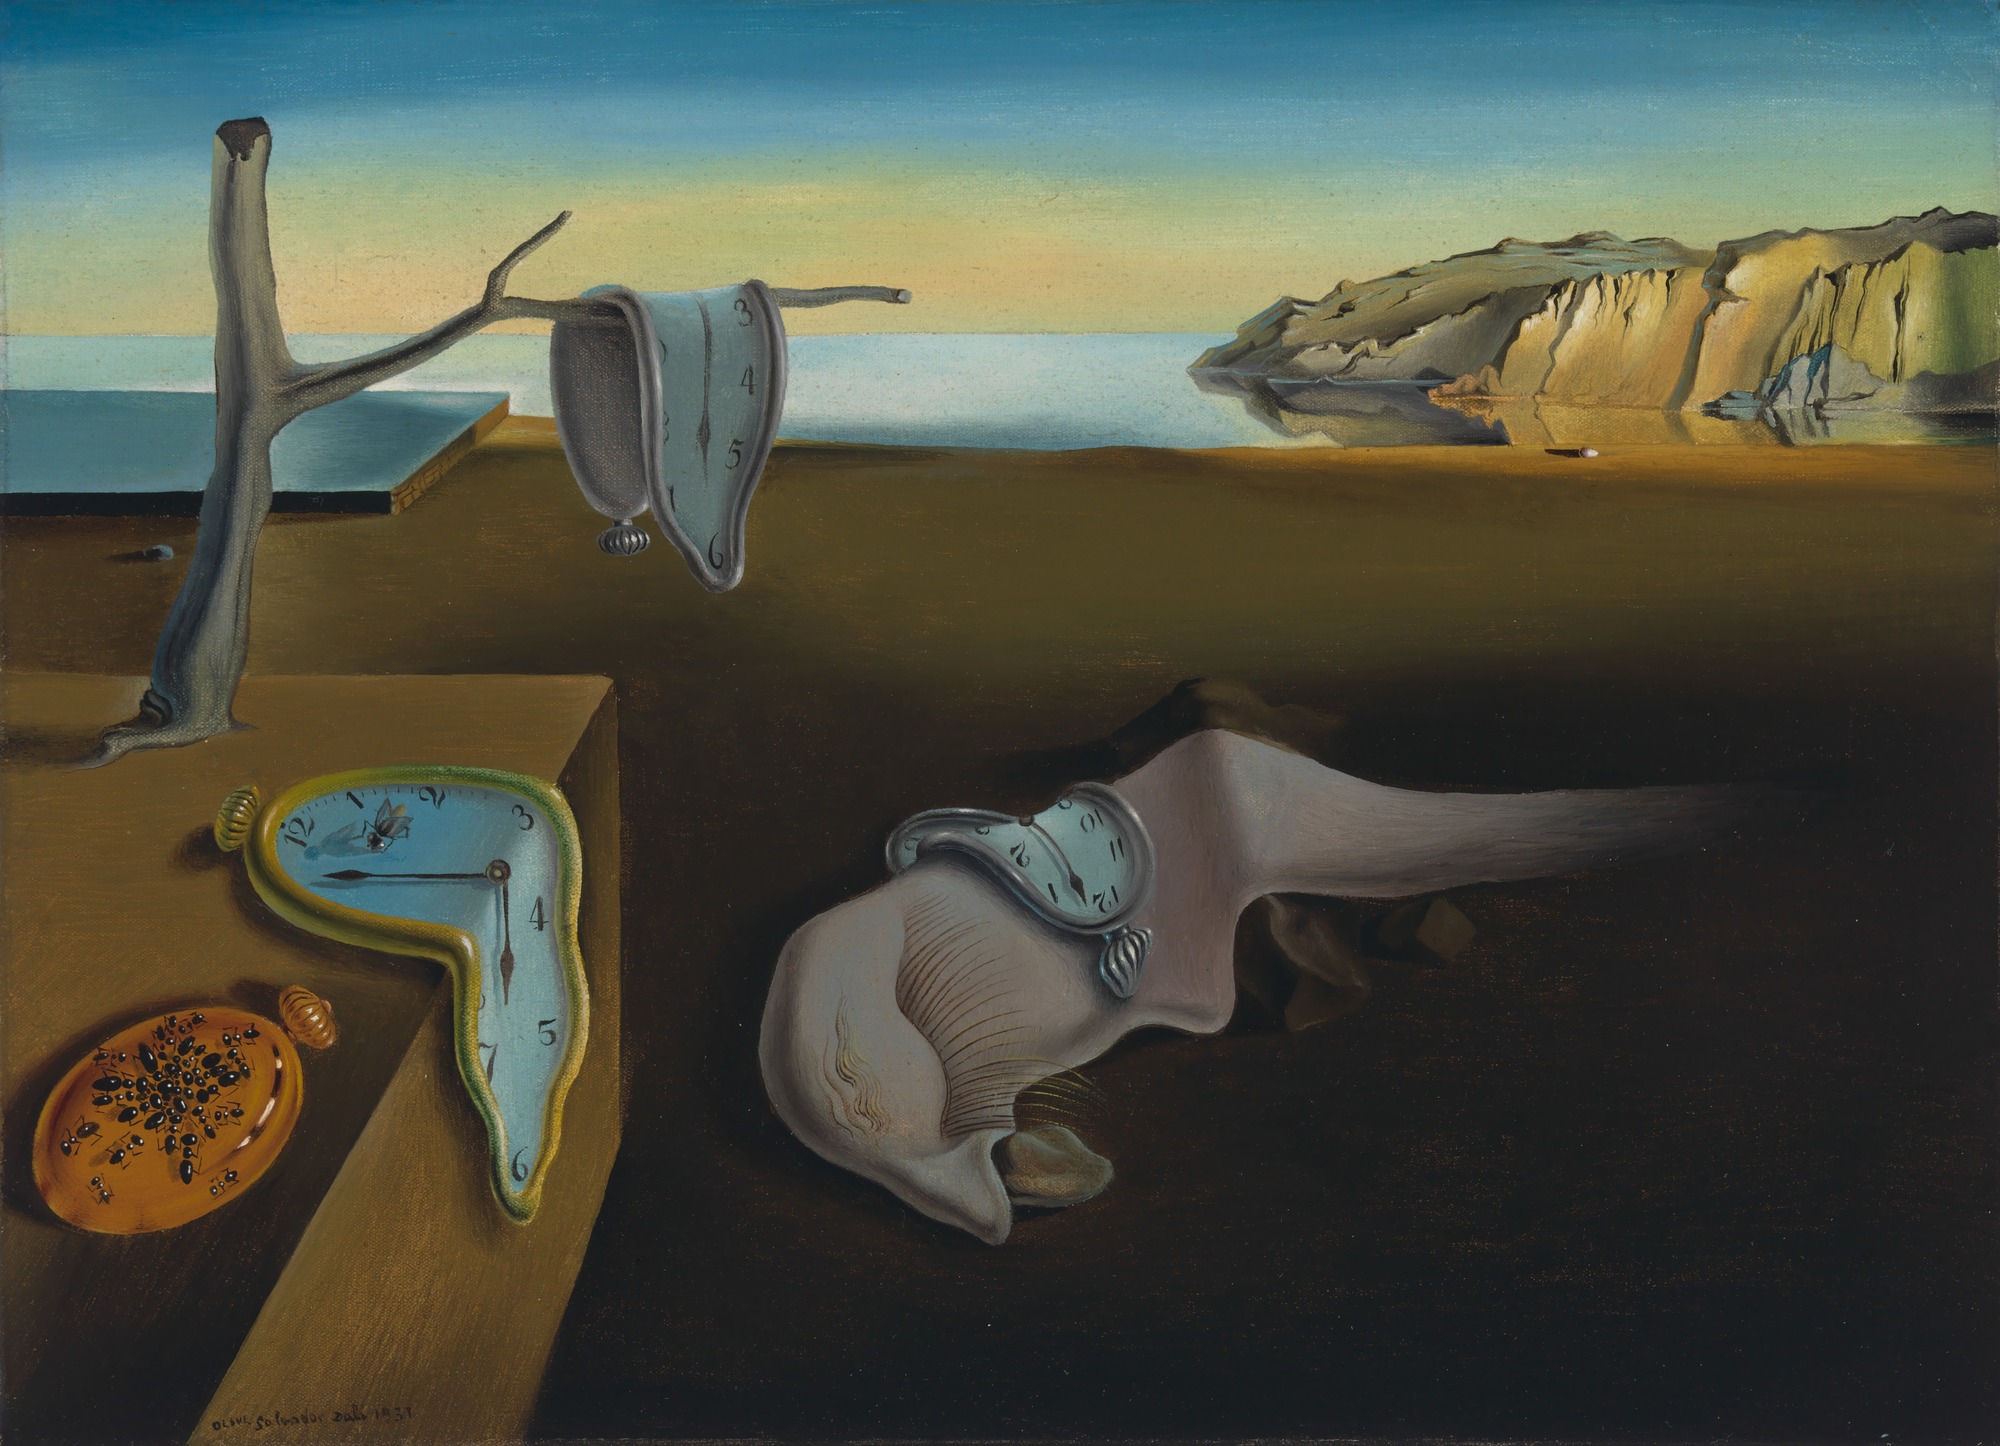 Salvador Dalí. The Persistence of Memory. 1931 | MoMA